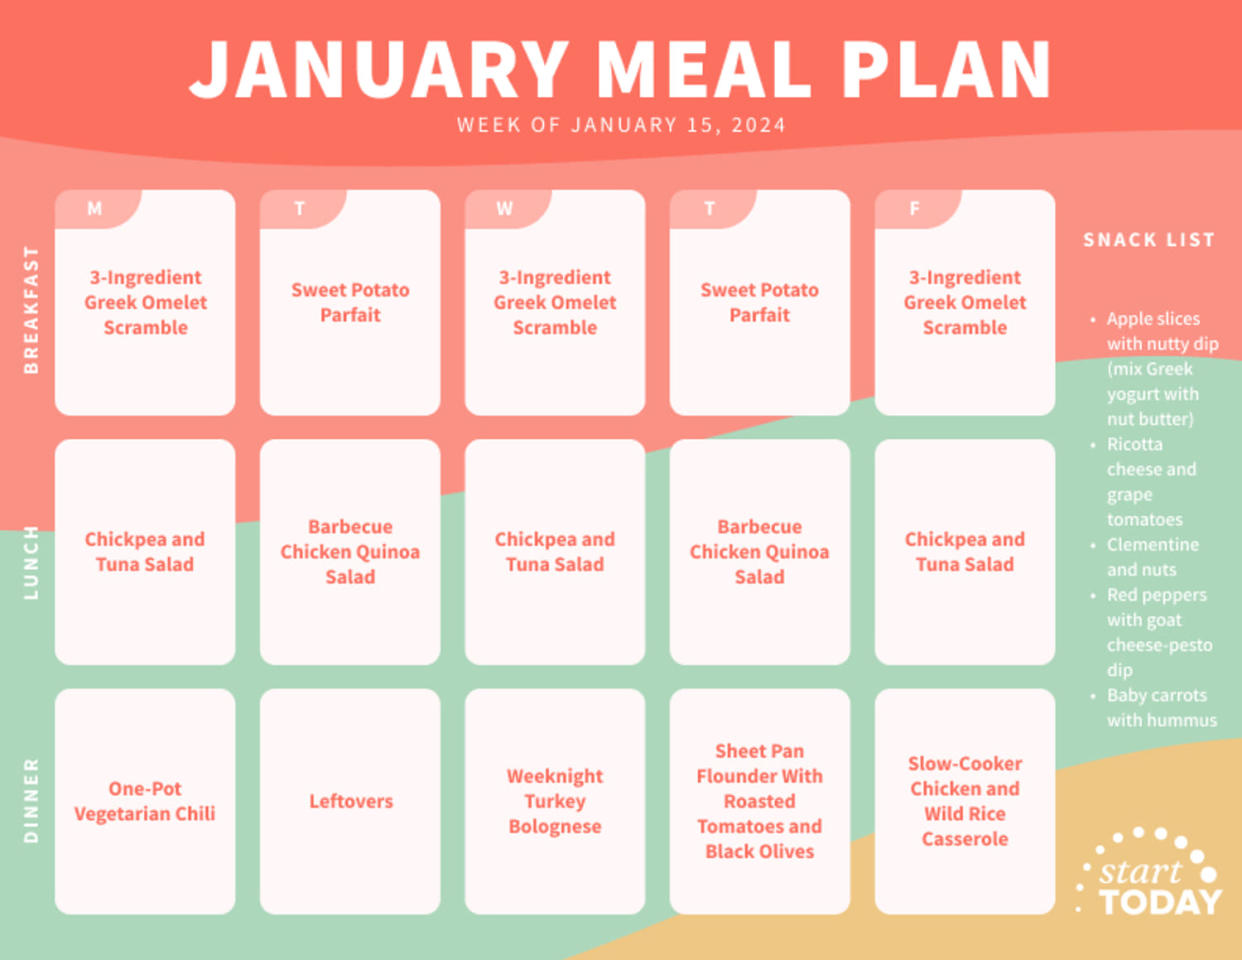 Start TODAY meal plan week of January 15, 2024